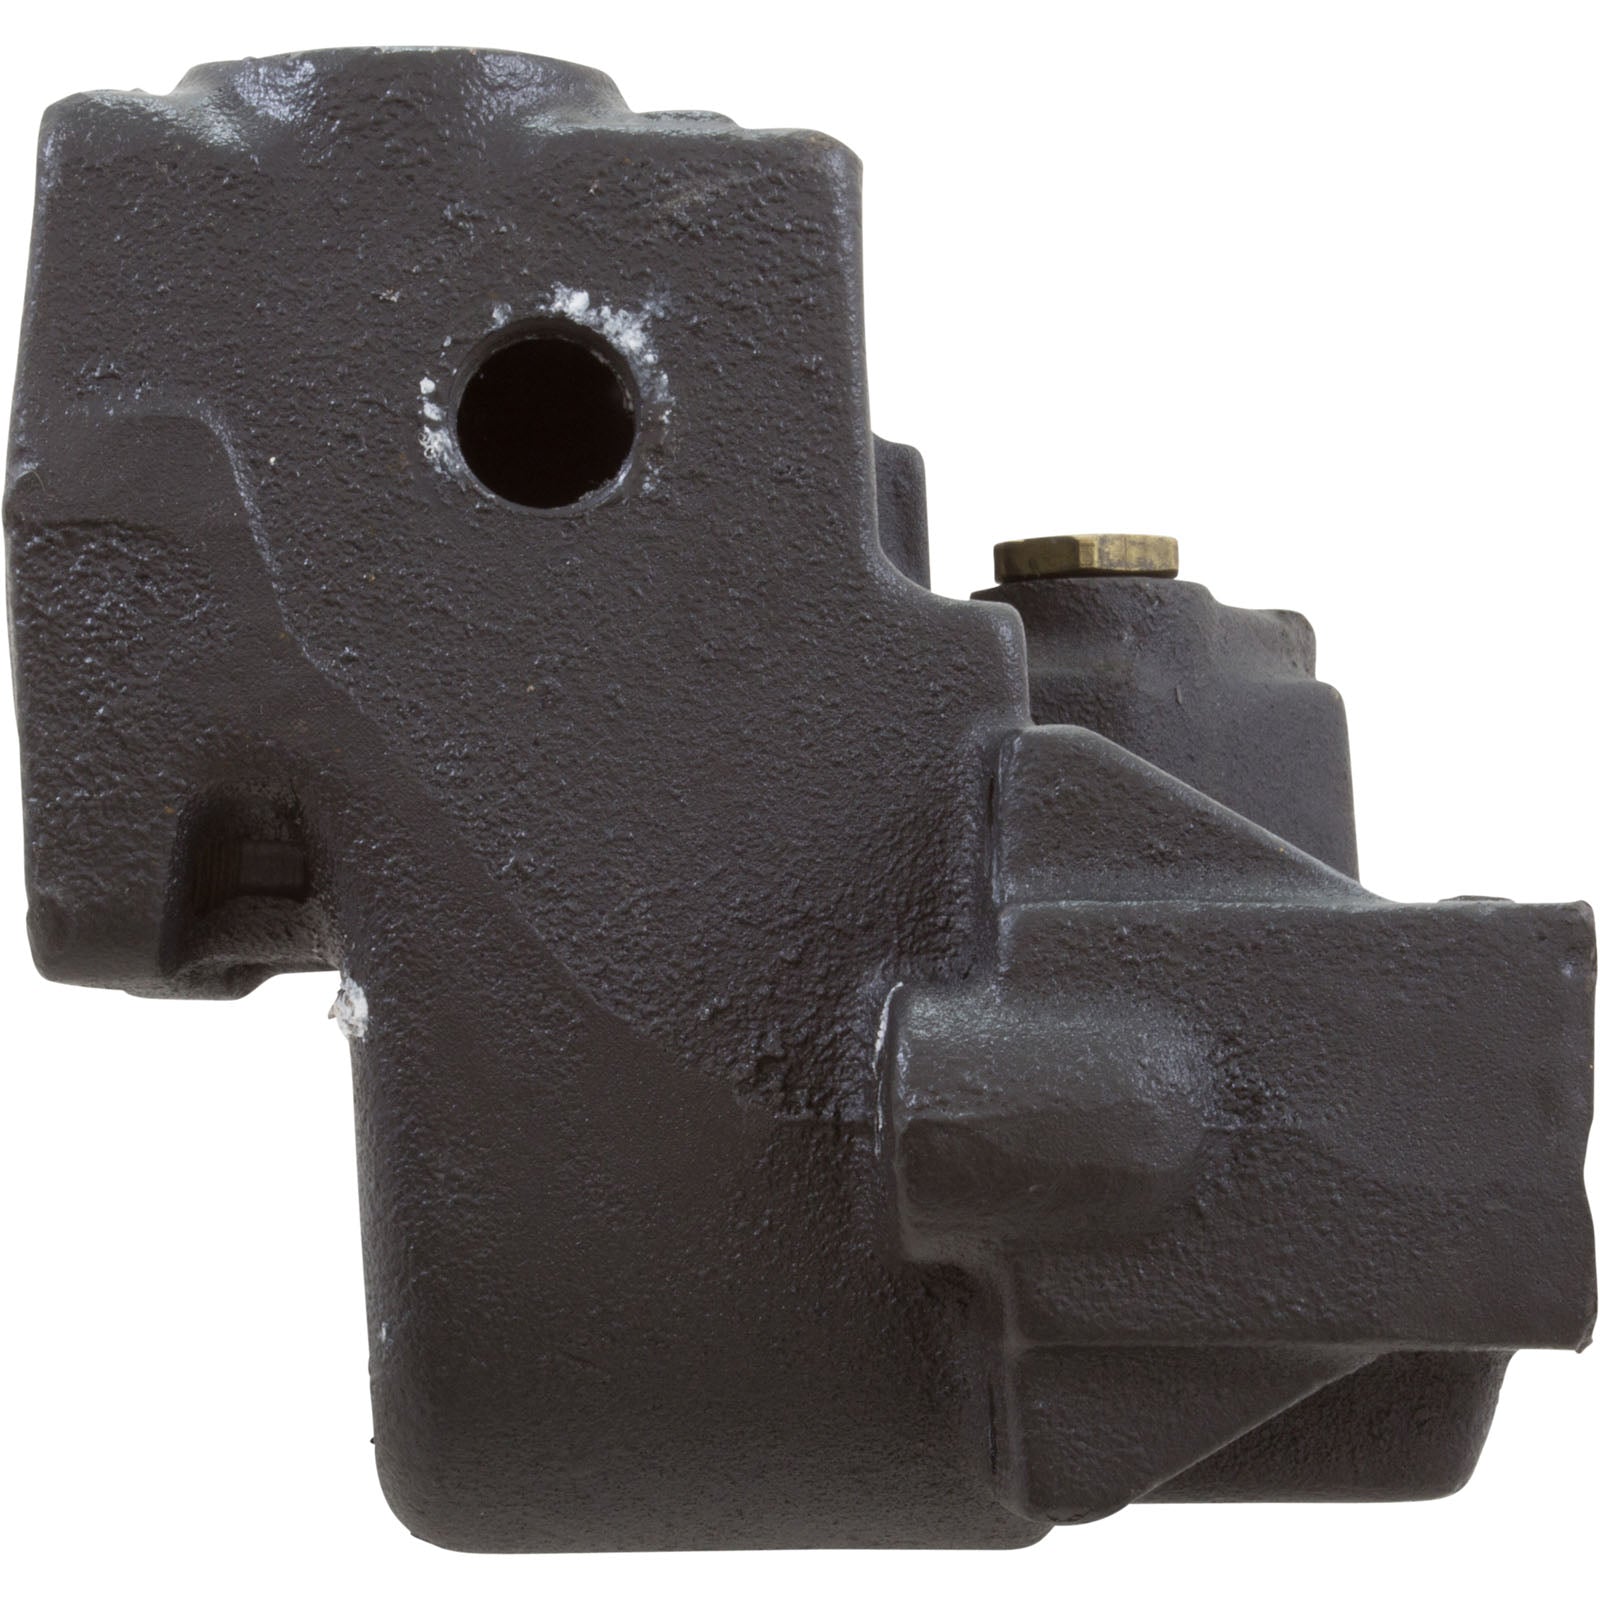 Header Cast Iron, Inlet/Outlet, Raypak 003759F